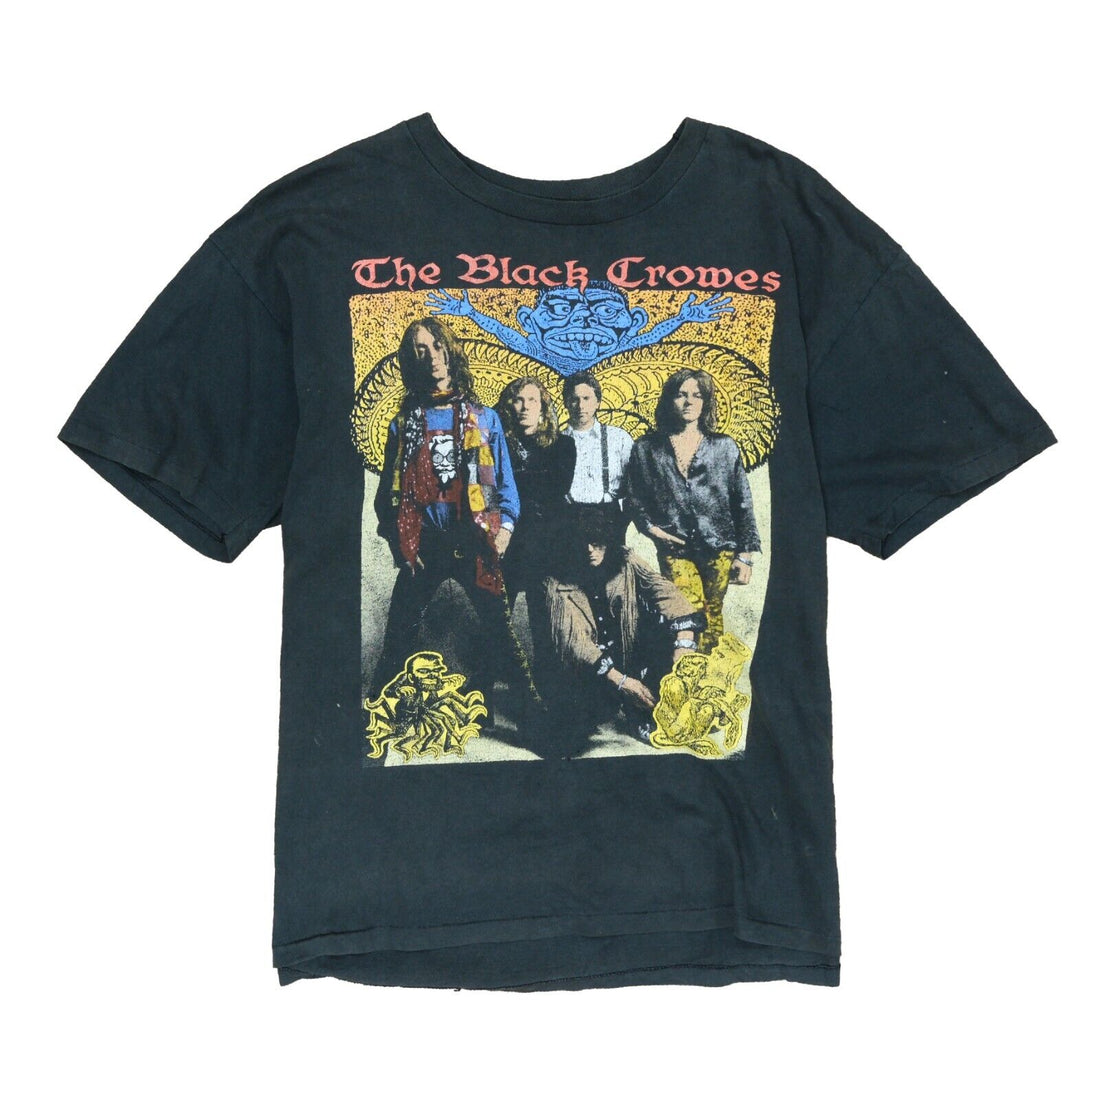 Vintage The Black Crowes T-Shirt Size XL Black Band Tee Single Stich 90s